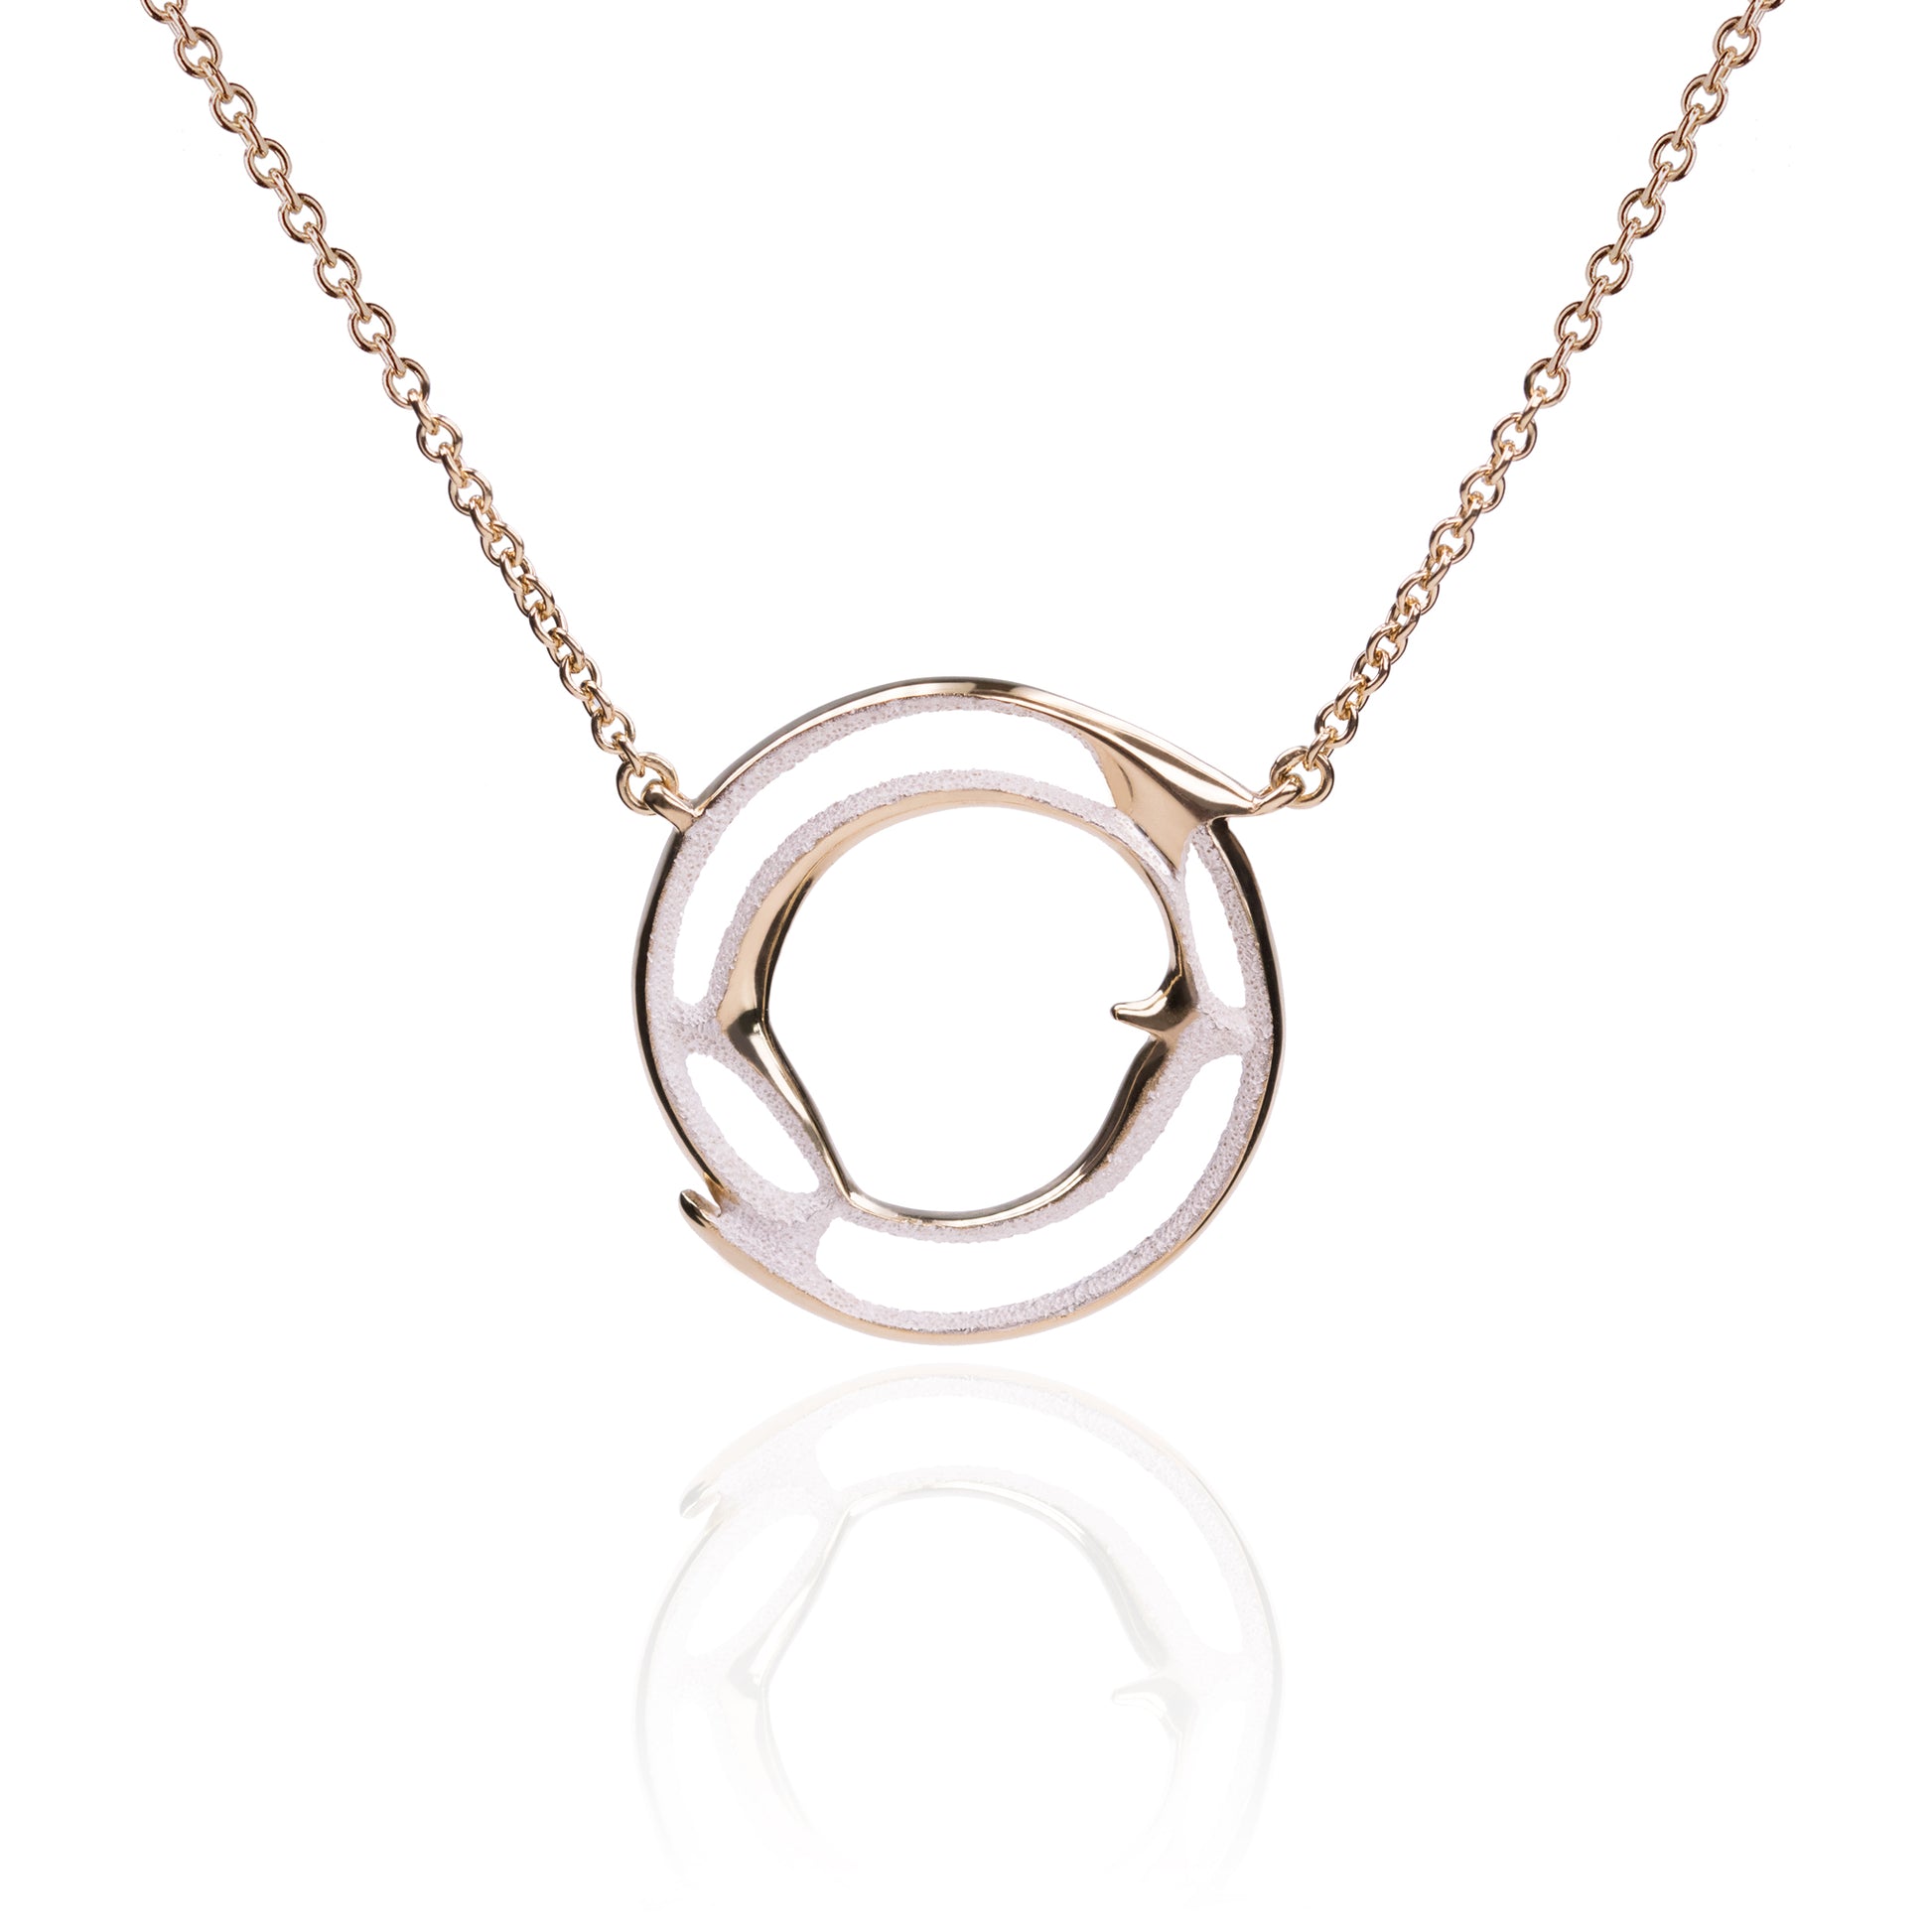 Orme-Brown Contemporary Fine Jewellery ethical medium halo pendant necklace in sustainable recycled silver and gold 